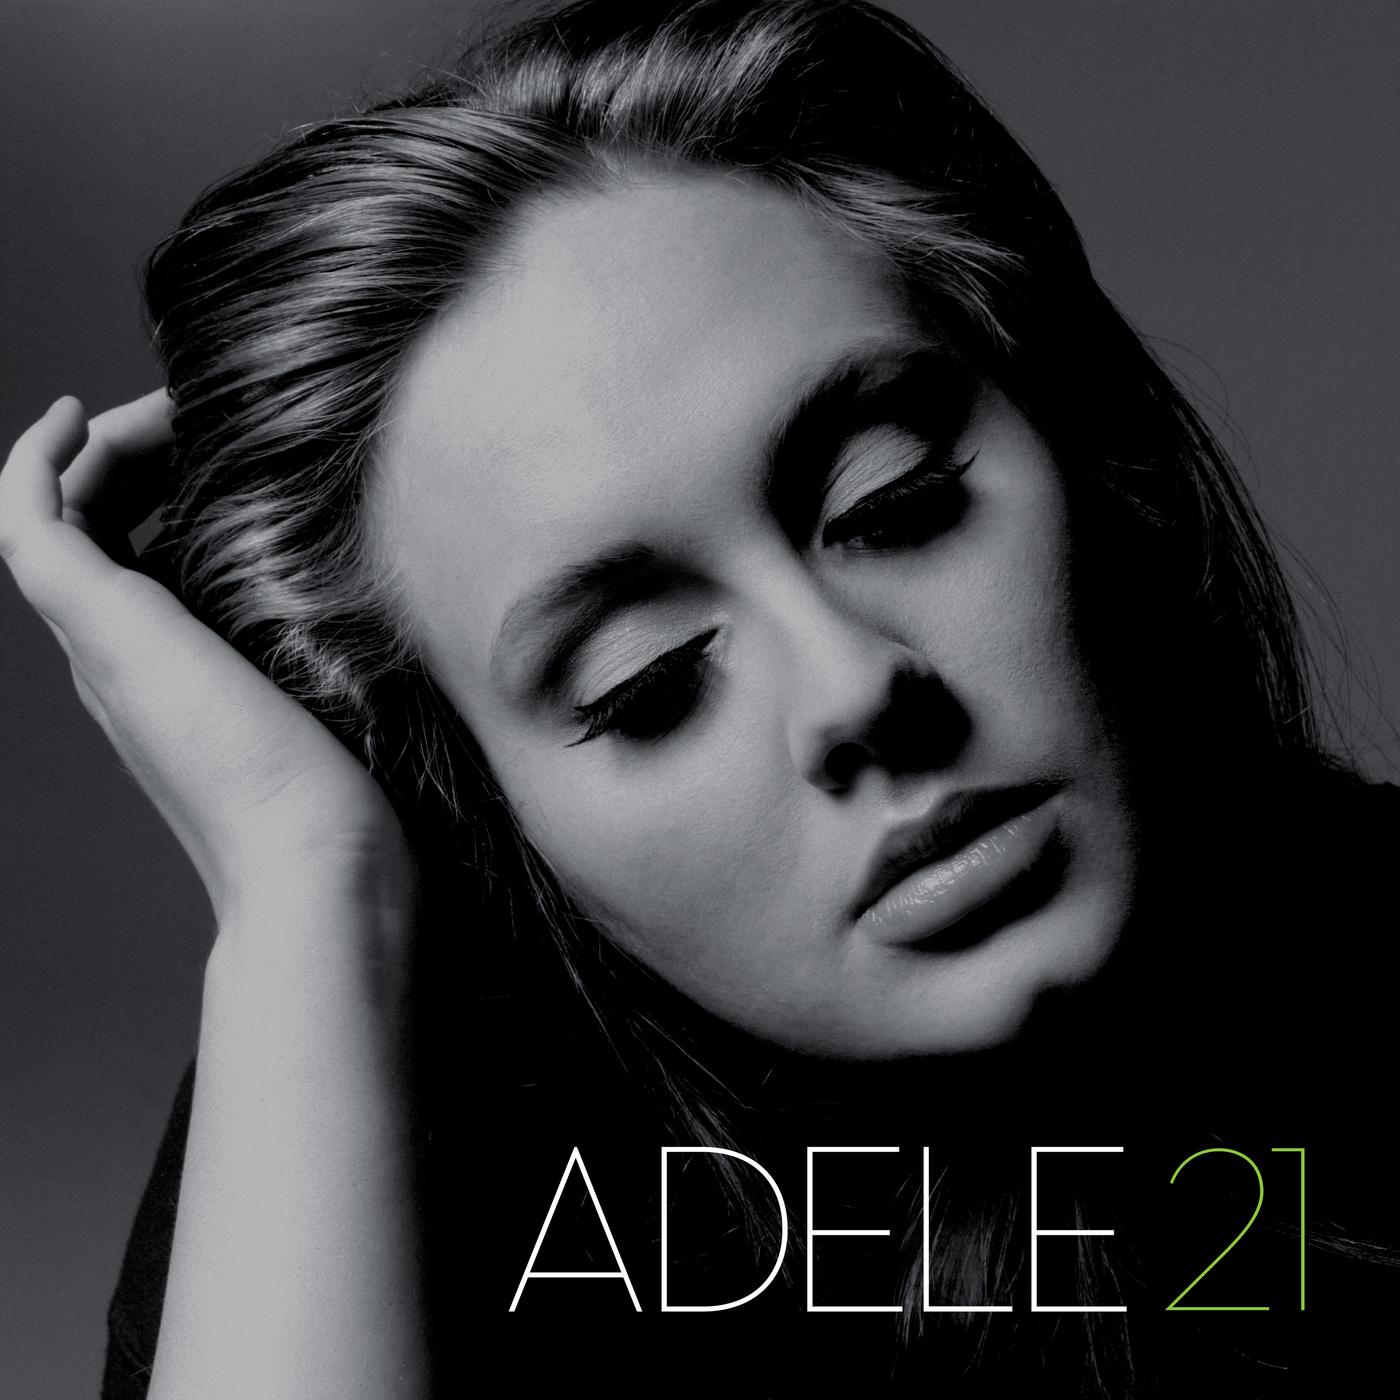 Rolling in the Deep歌词 歌手Adele-专辑21-单曲《Rolling in the Deep》LRC歌词下载